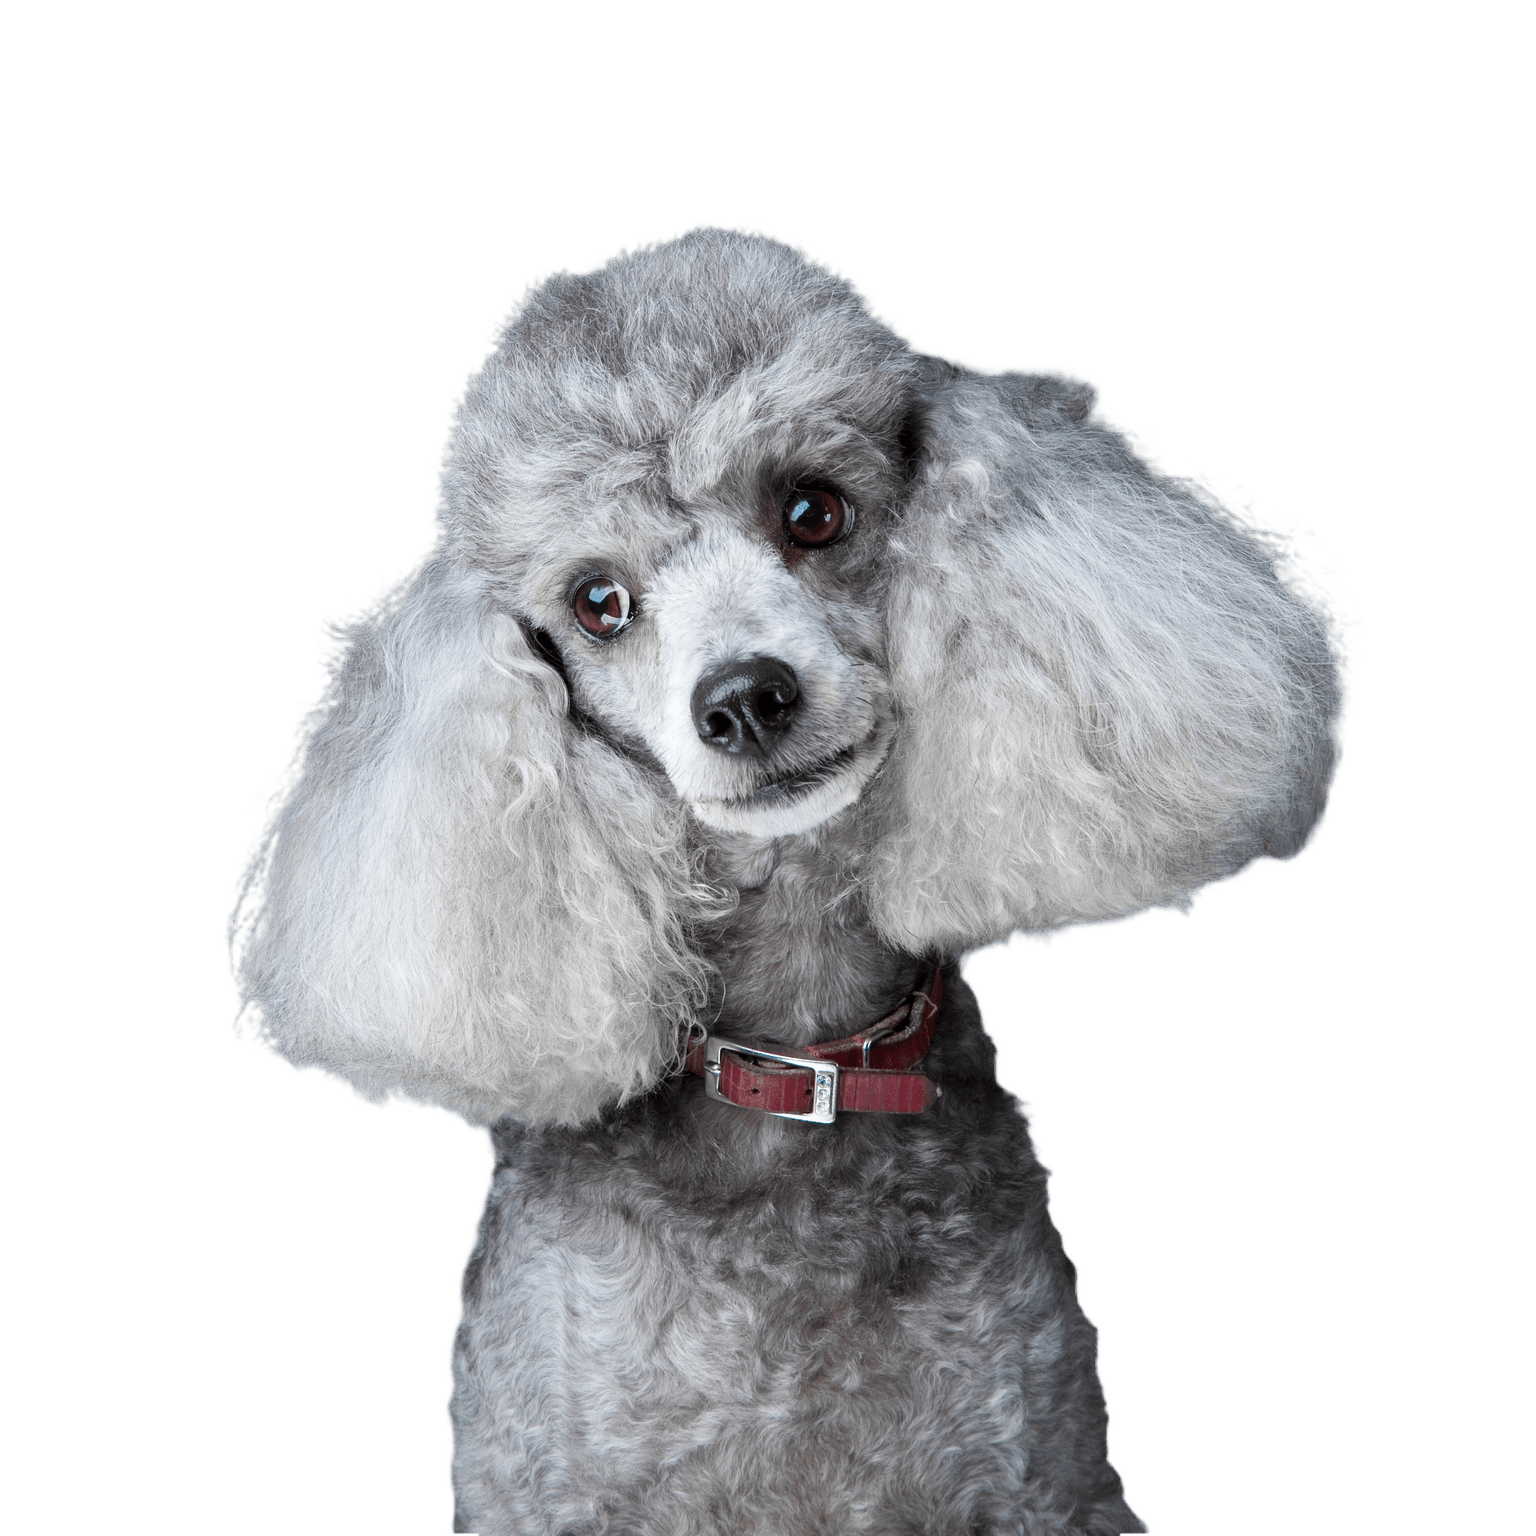 Close-up portrait of an obedient little gray poodle with a red leather collar on a gray background